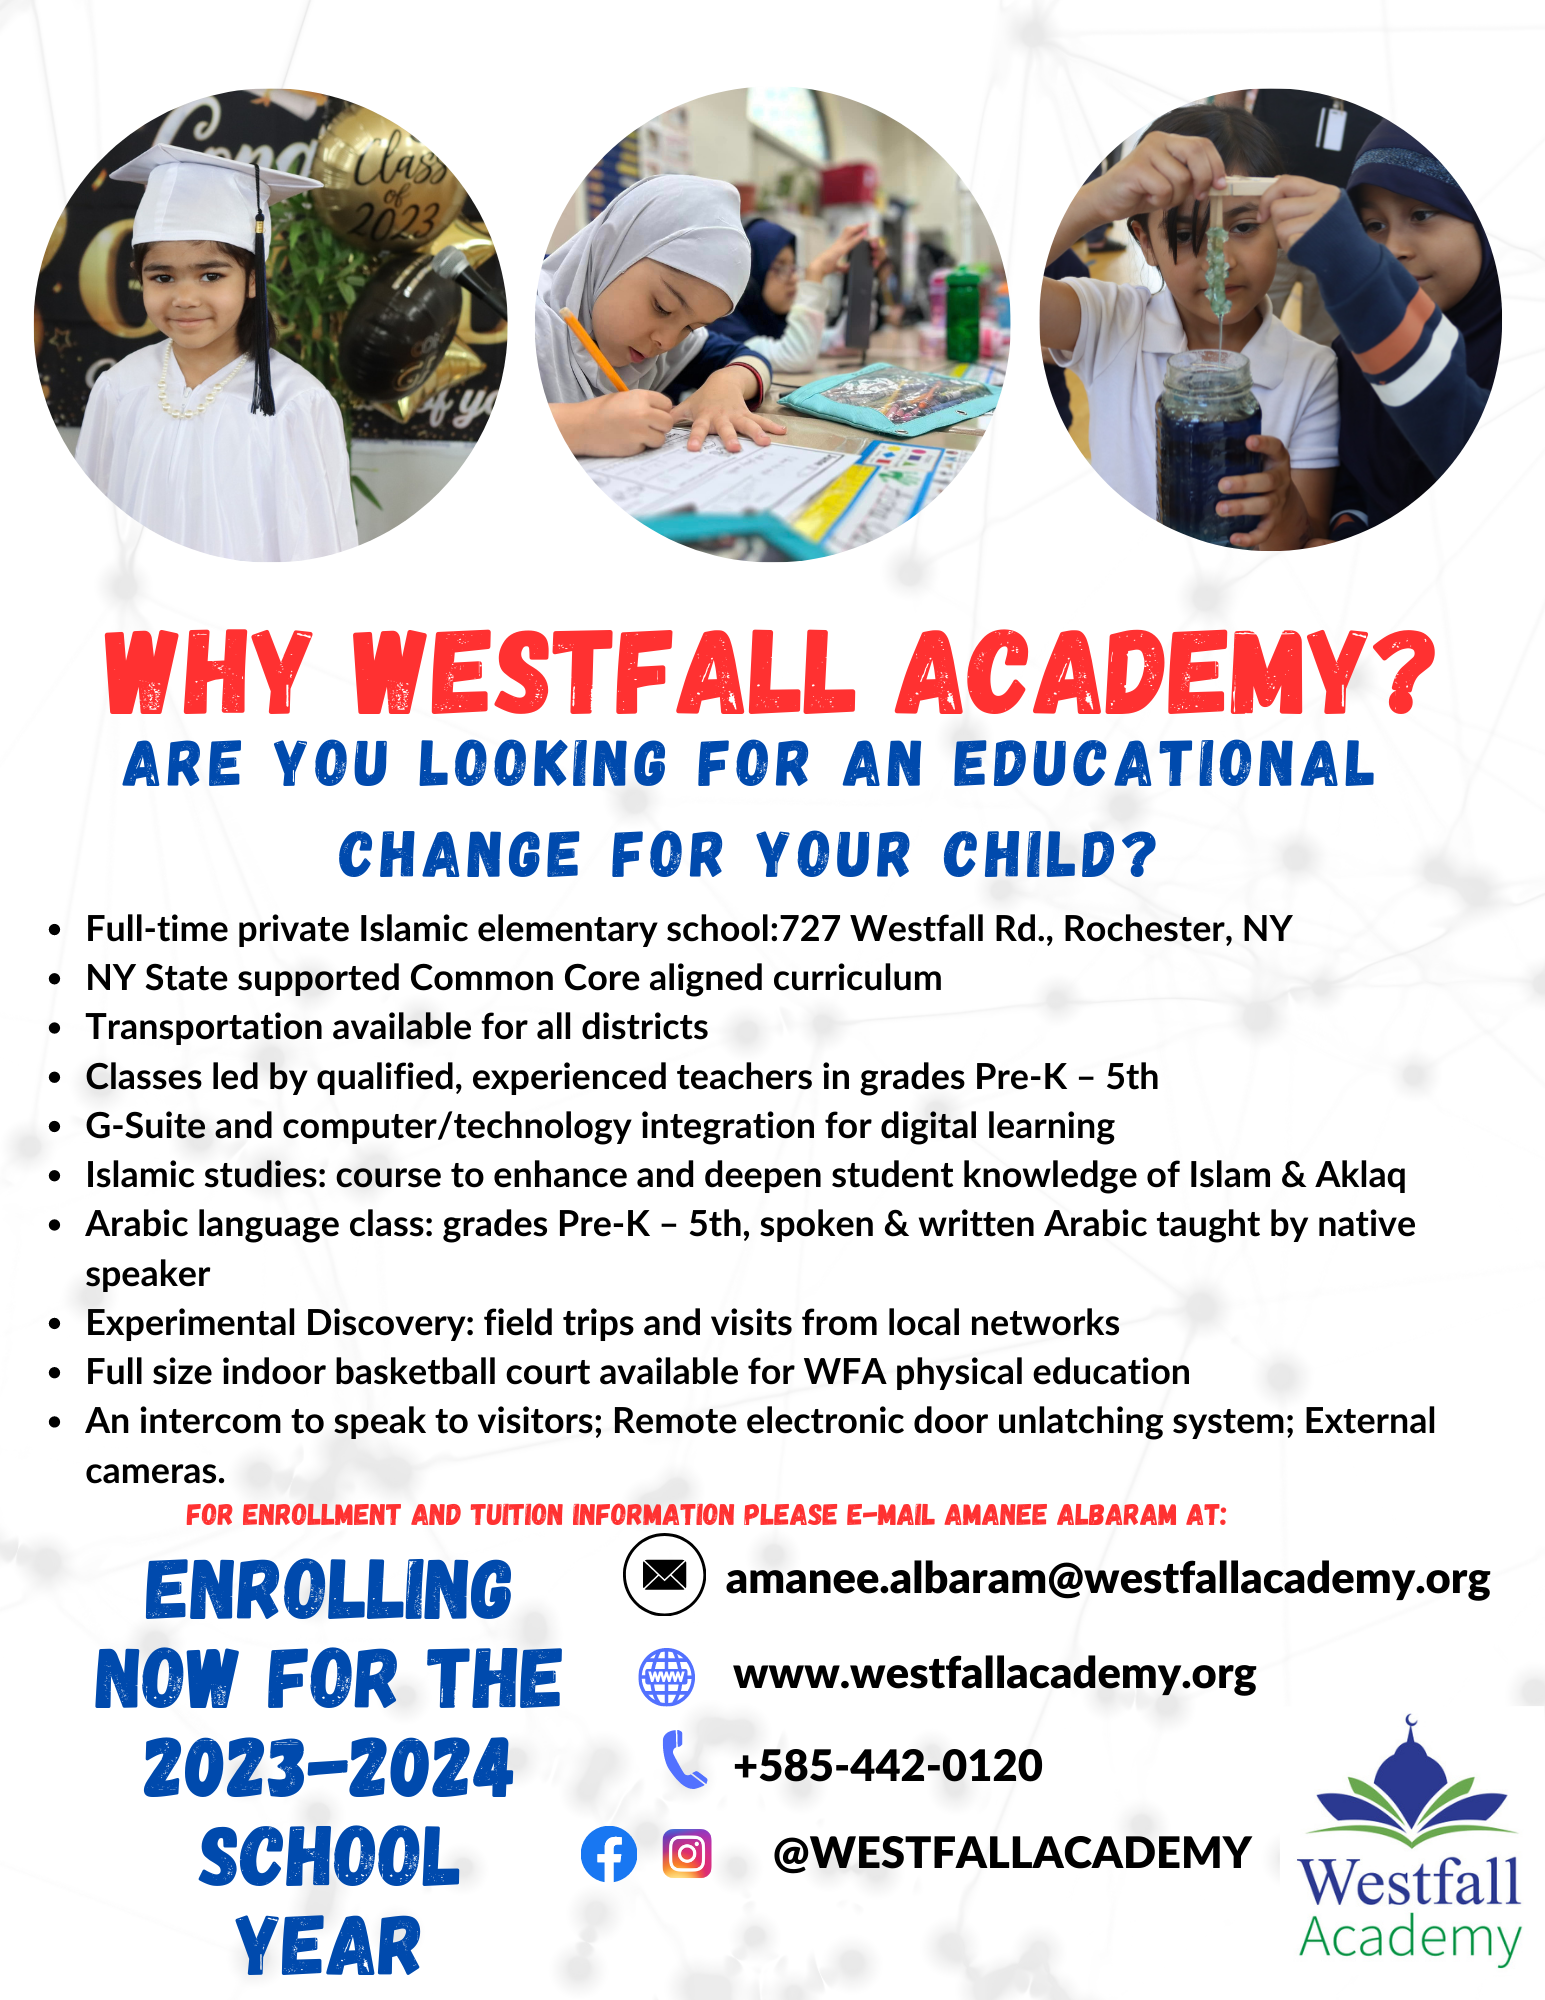 Enroll your child NOW for the new academic school year 2023-2024. Seats are limited.